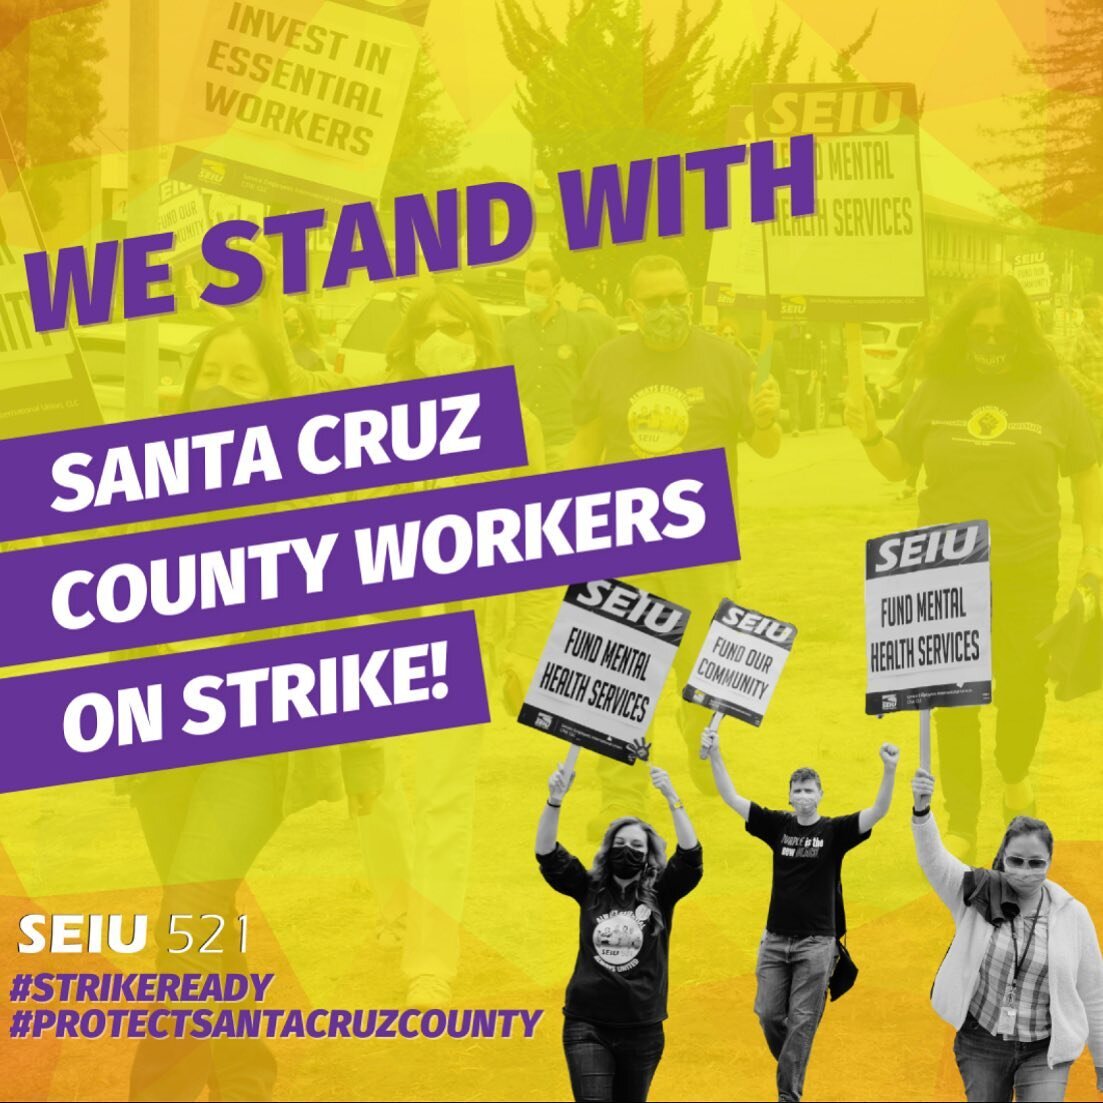 We support the Santa Cruz strike and believe Social Workers, Public Health Nurses, Mental Health Specialists, Administrative Staff must have the resources they need to deliver critical community benefits and services. Share this post and tag: @seiu52